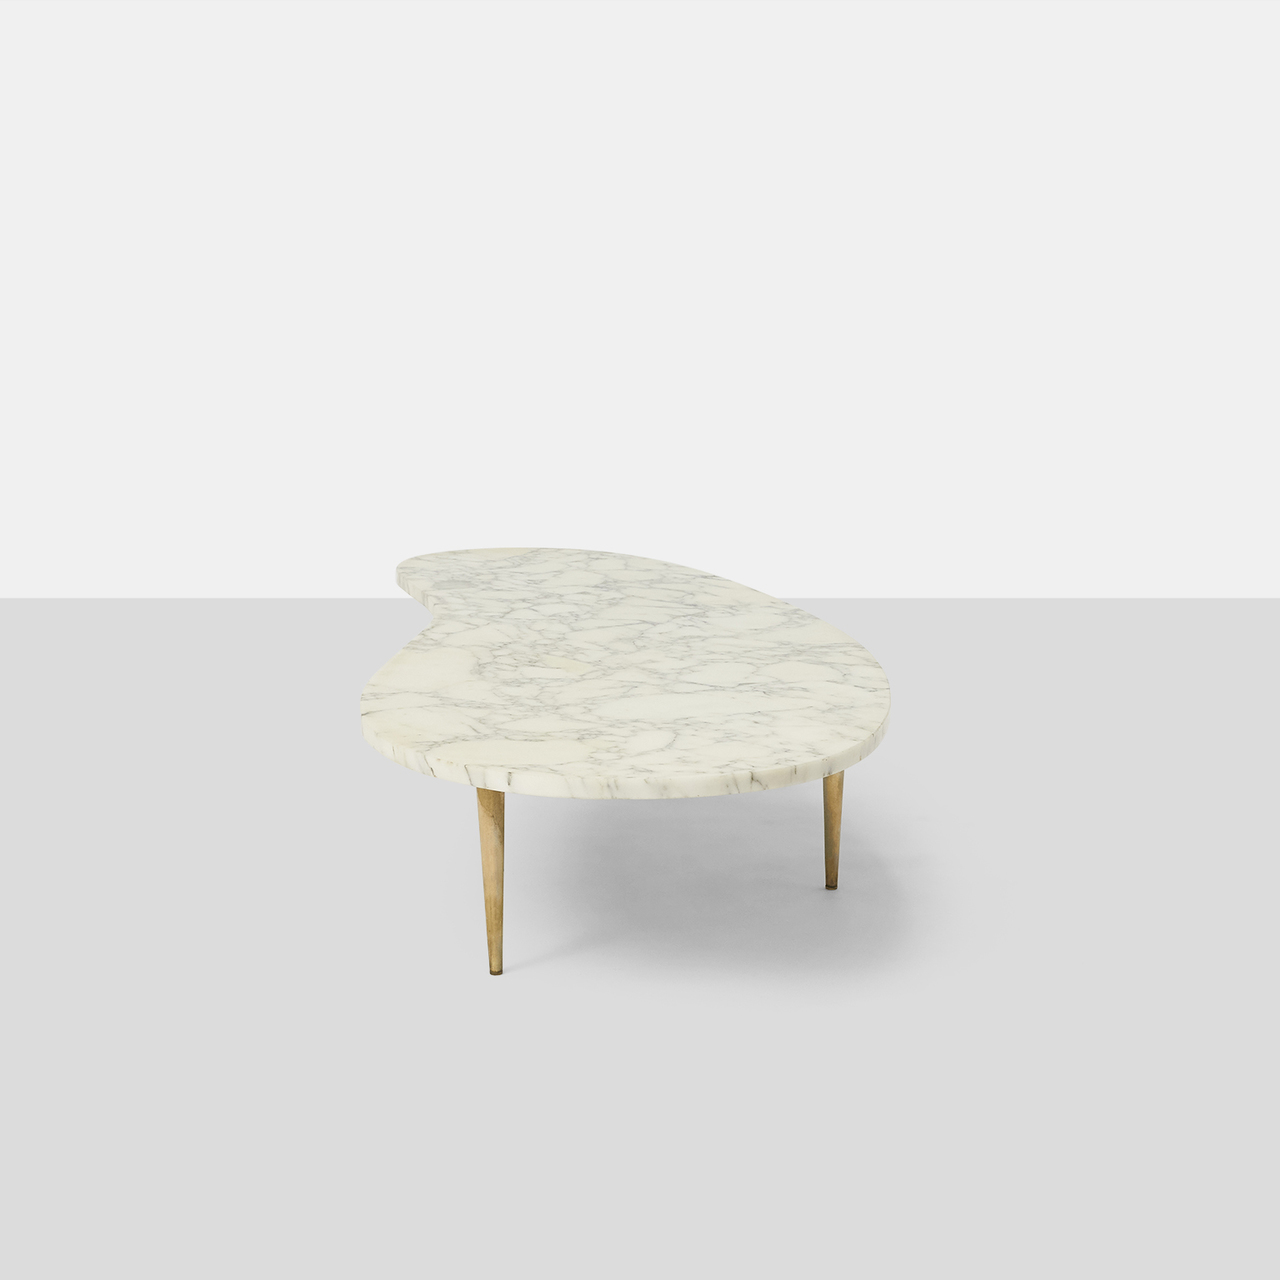 Italian Marble Top Coffee Table – Almond and Company